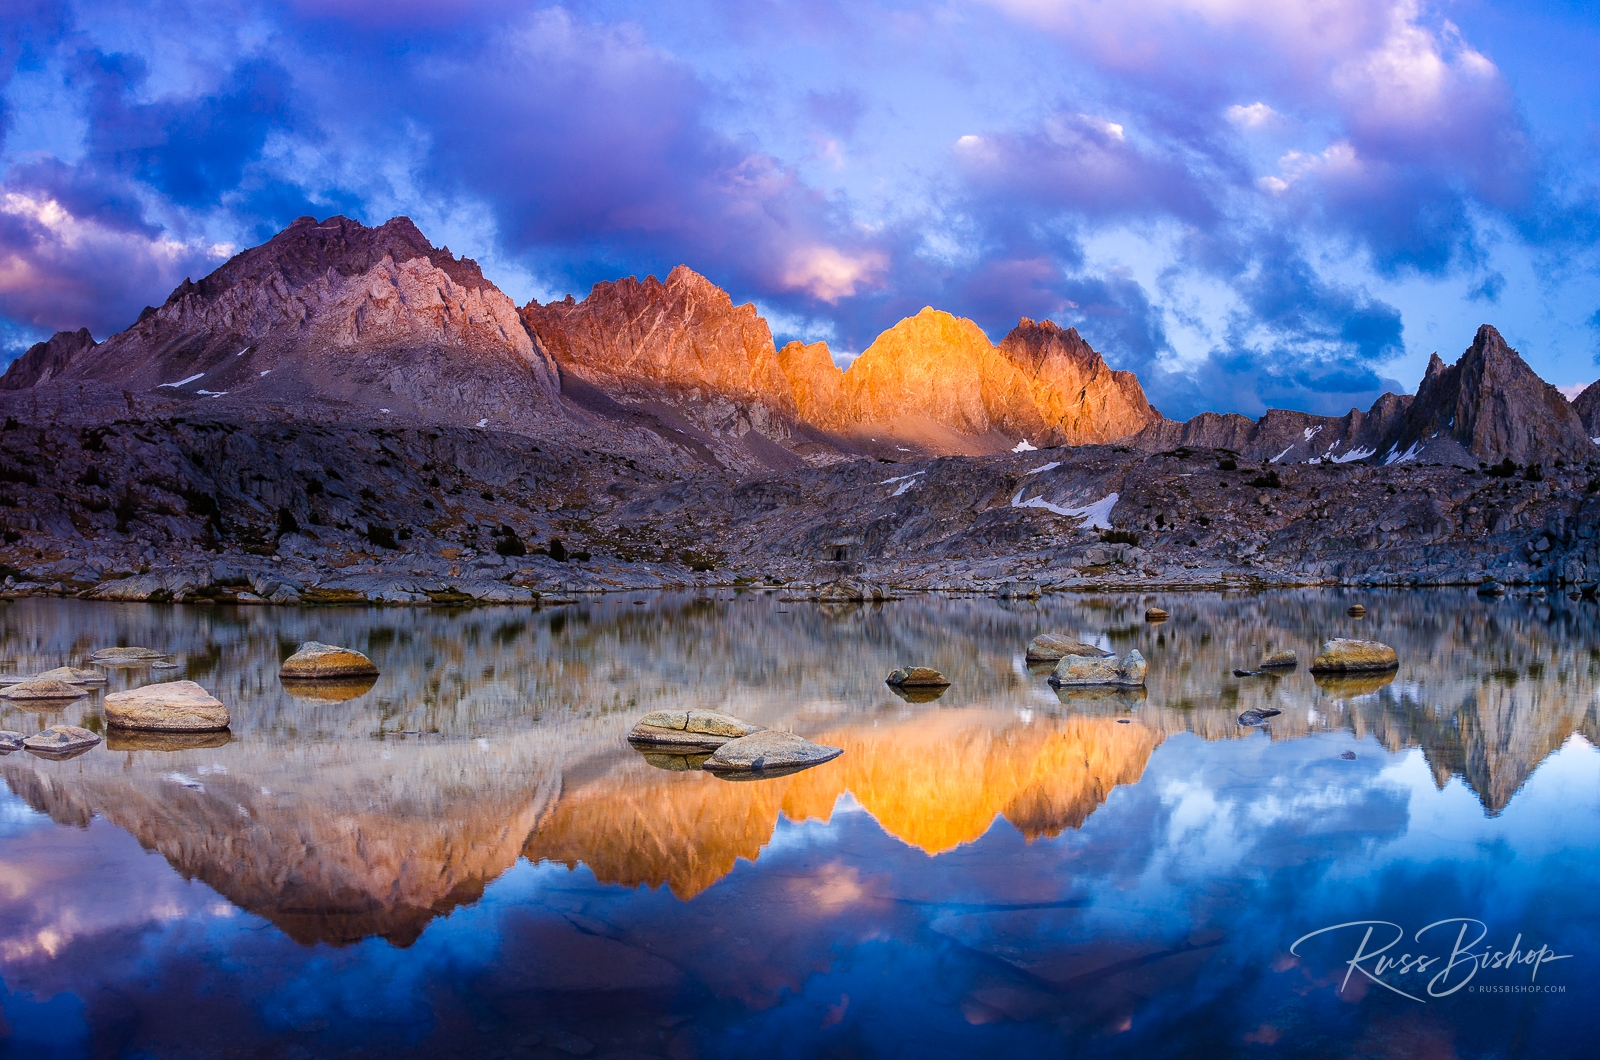 Evening light on the Palisades in Dusy Basin, Kings Canyon National Park, California